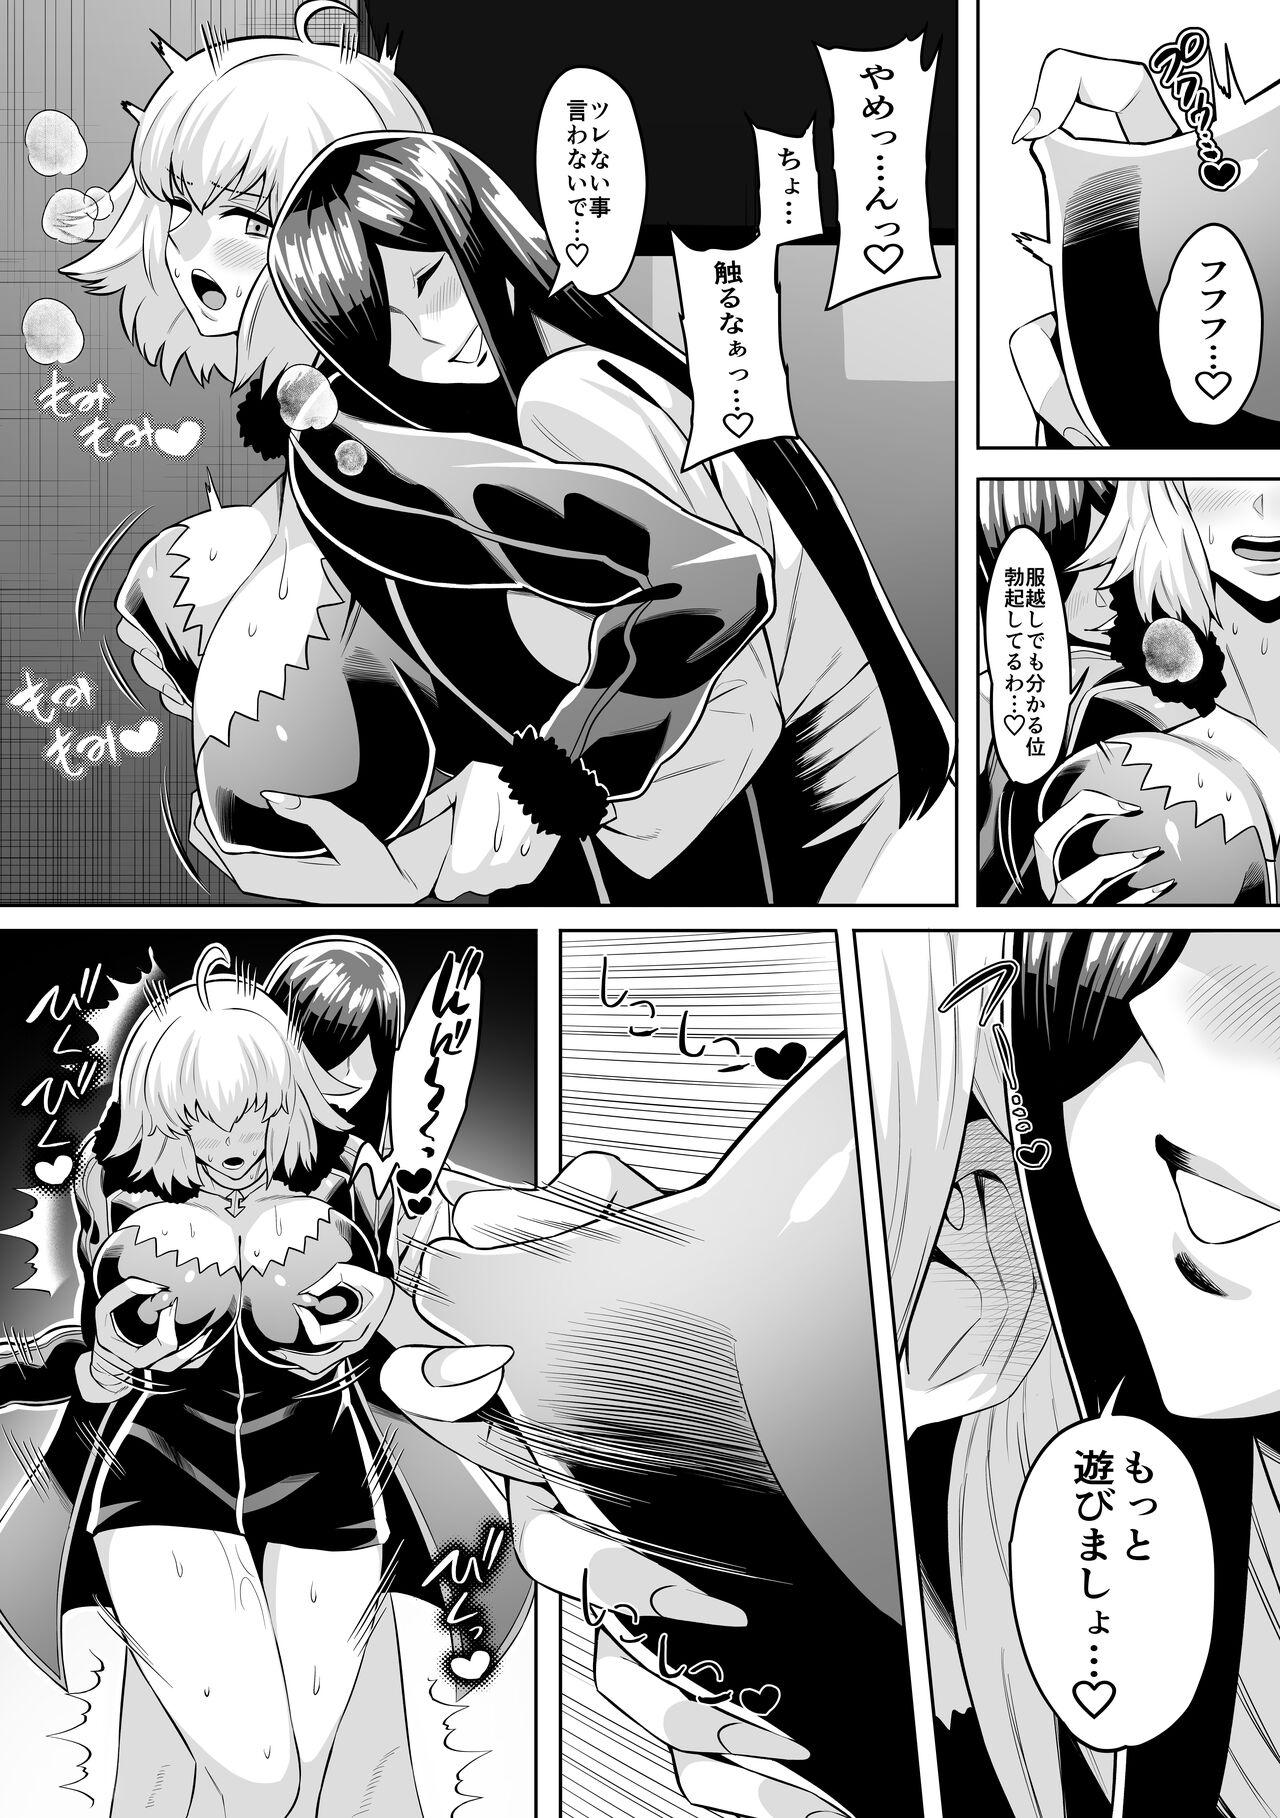 Freaky ジャンヌオルタ - Fate grand order Gay Group - Page 5